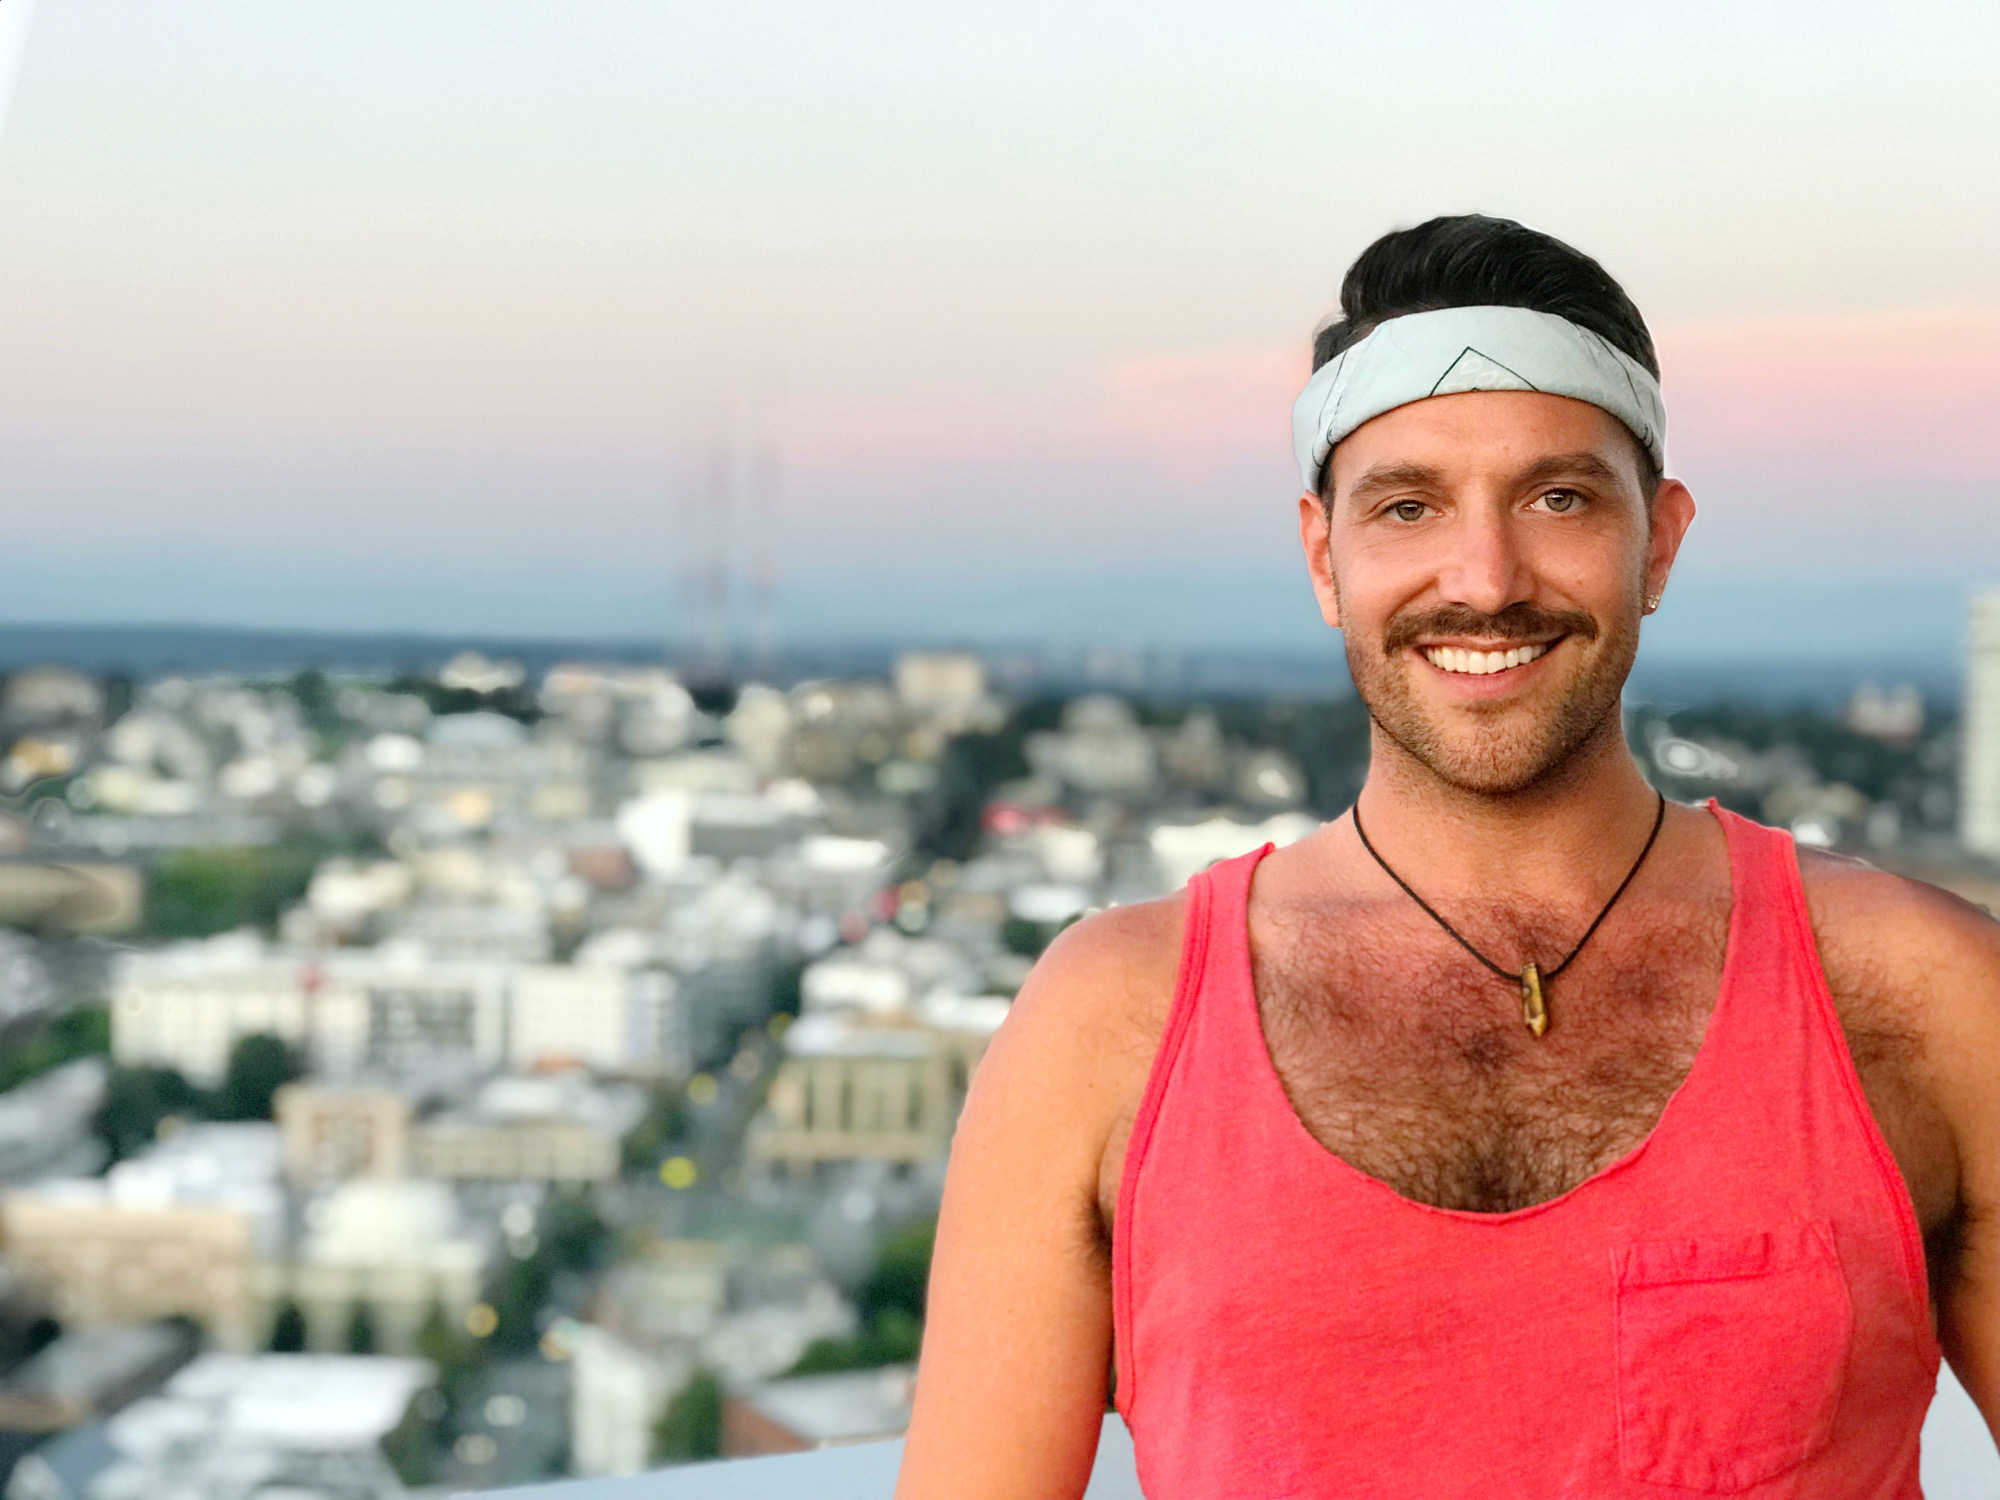 Ravi Roth Brings His Shine To The New Gaycation Travel Show [Exclusive Interview]